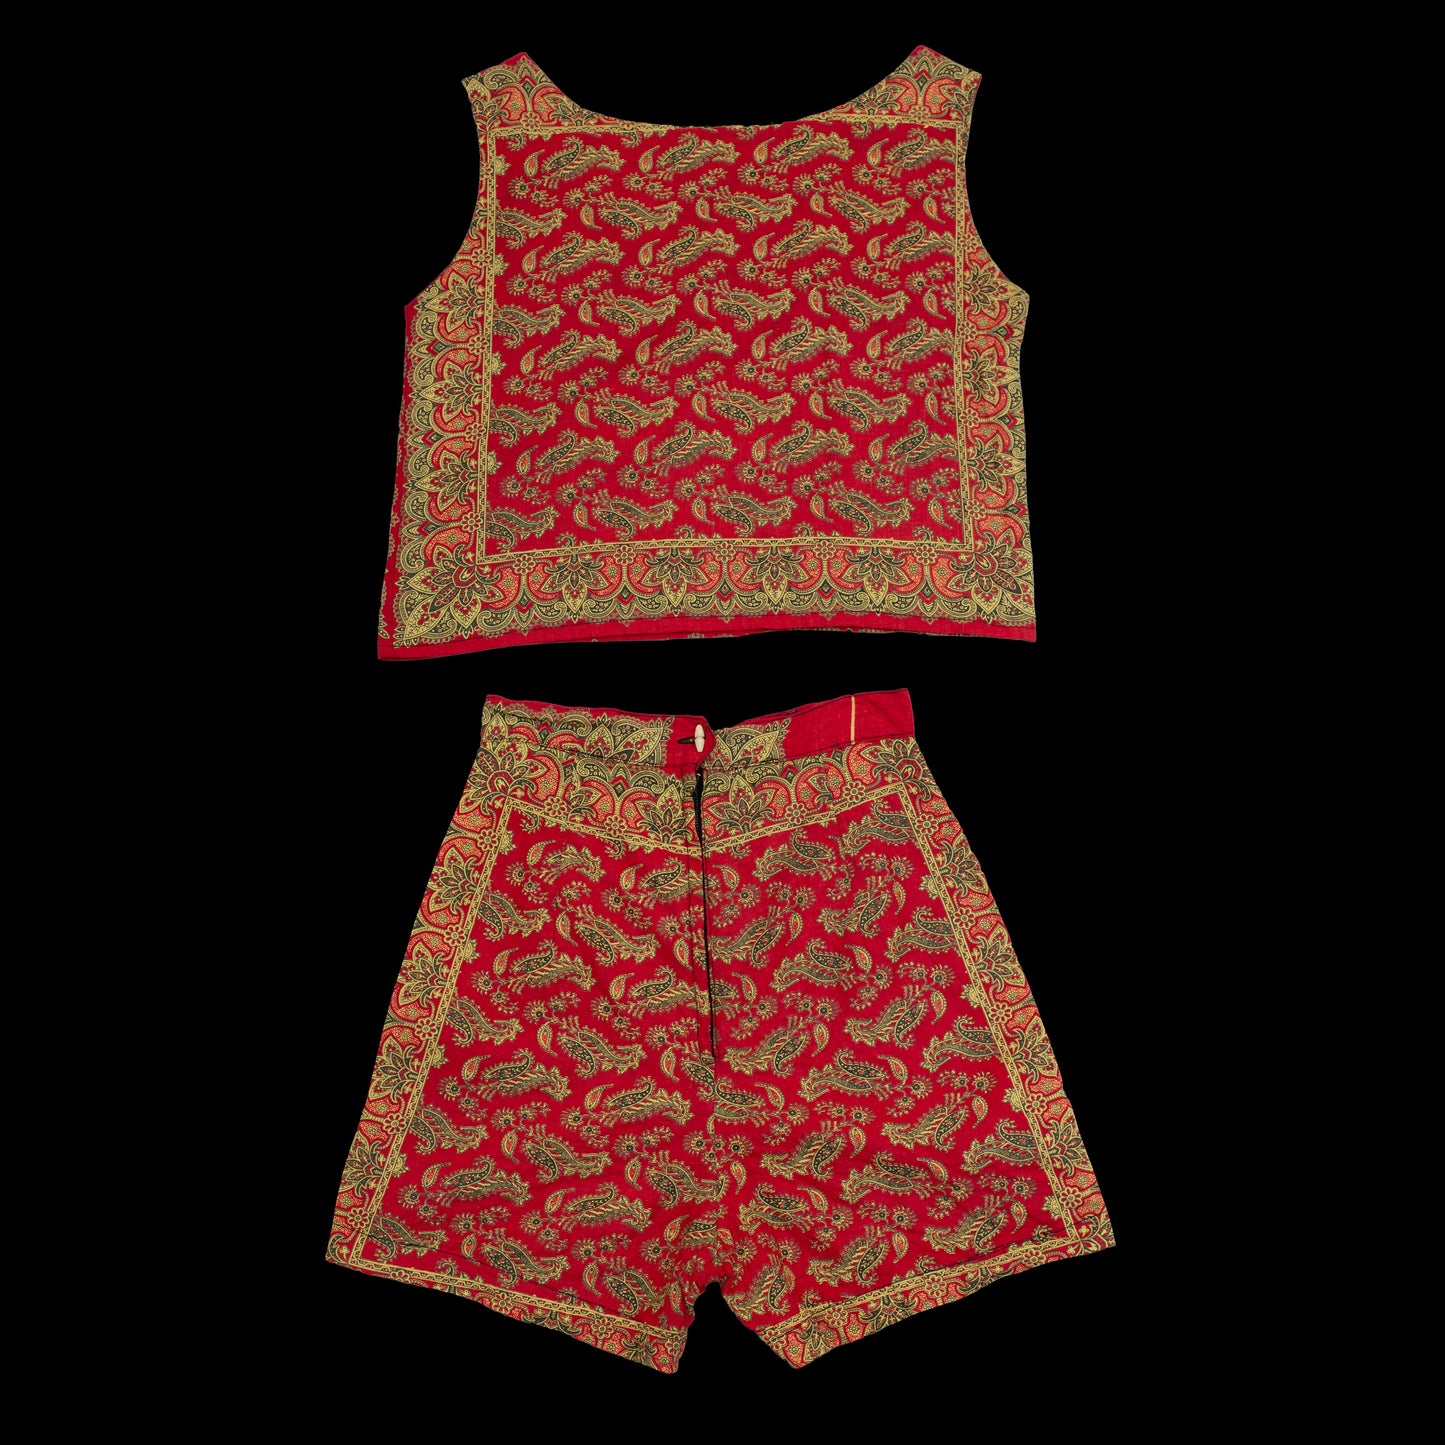 Vintage 1940s Red + Yellow Paisley Cotton Top + Shorts Set